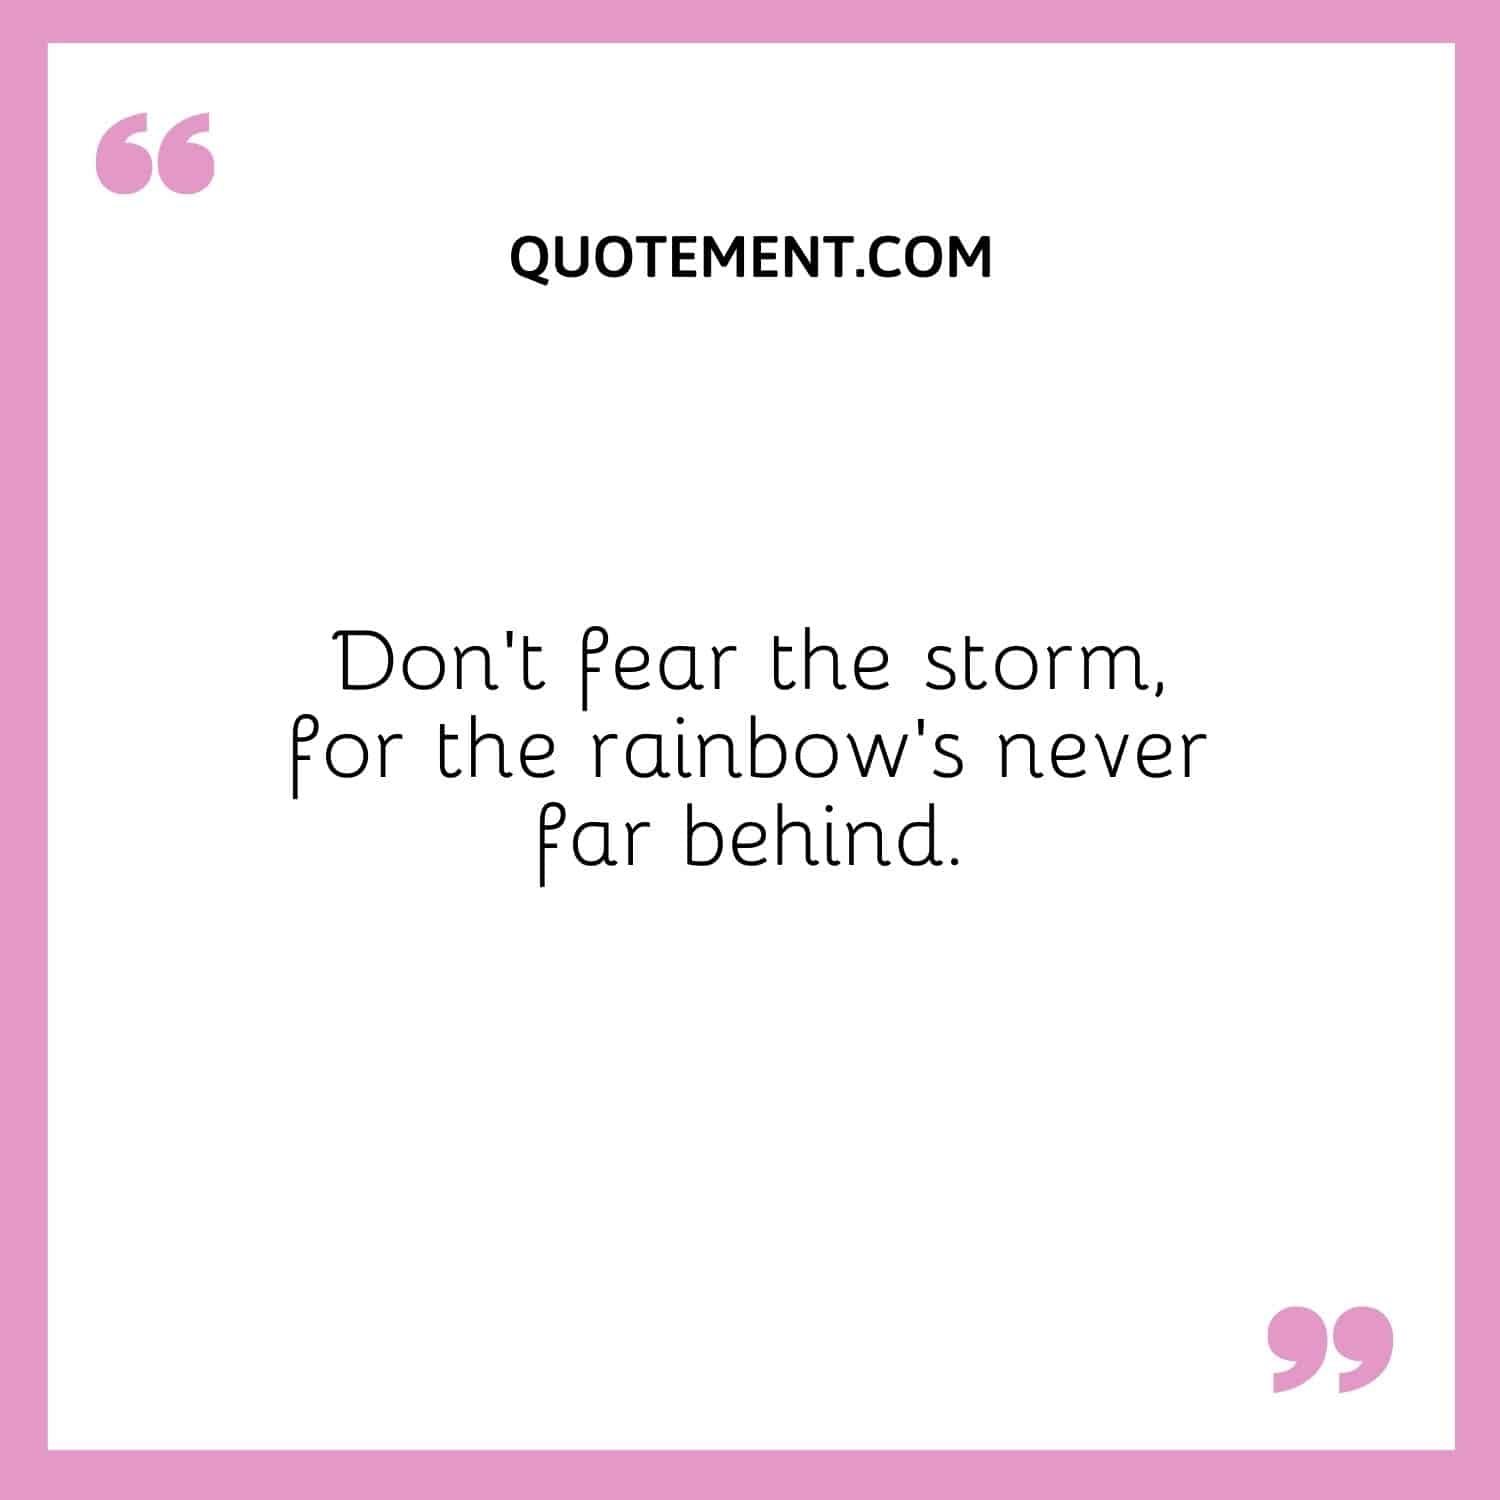 Don’t fear the storm, for the rainbow’s never far behind